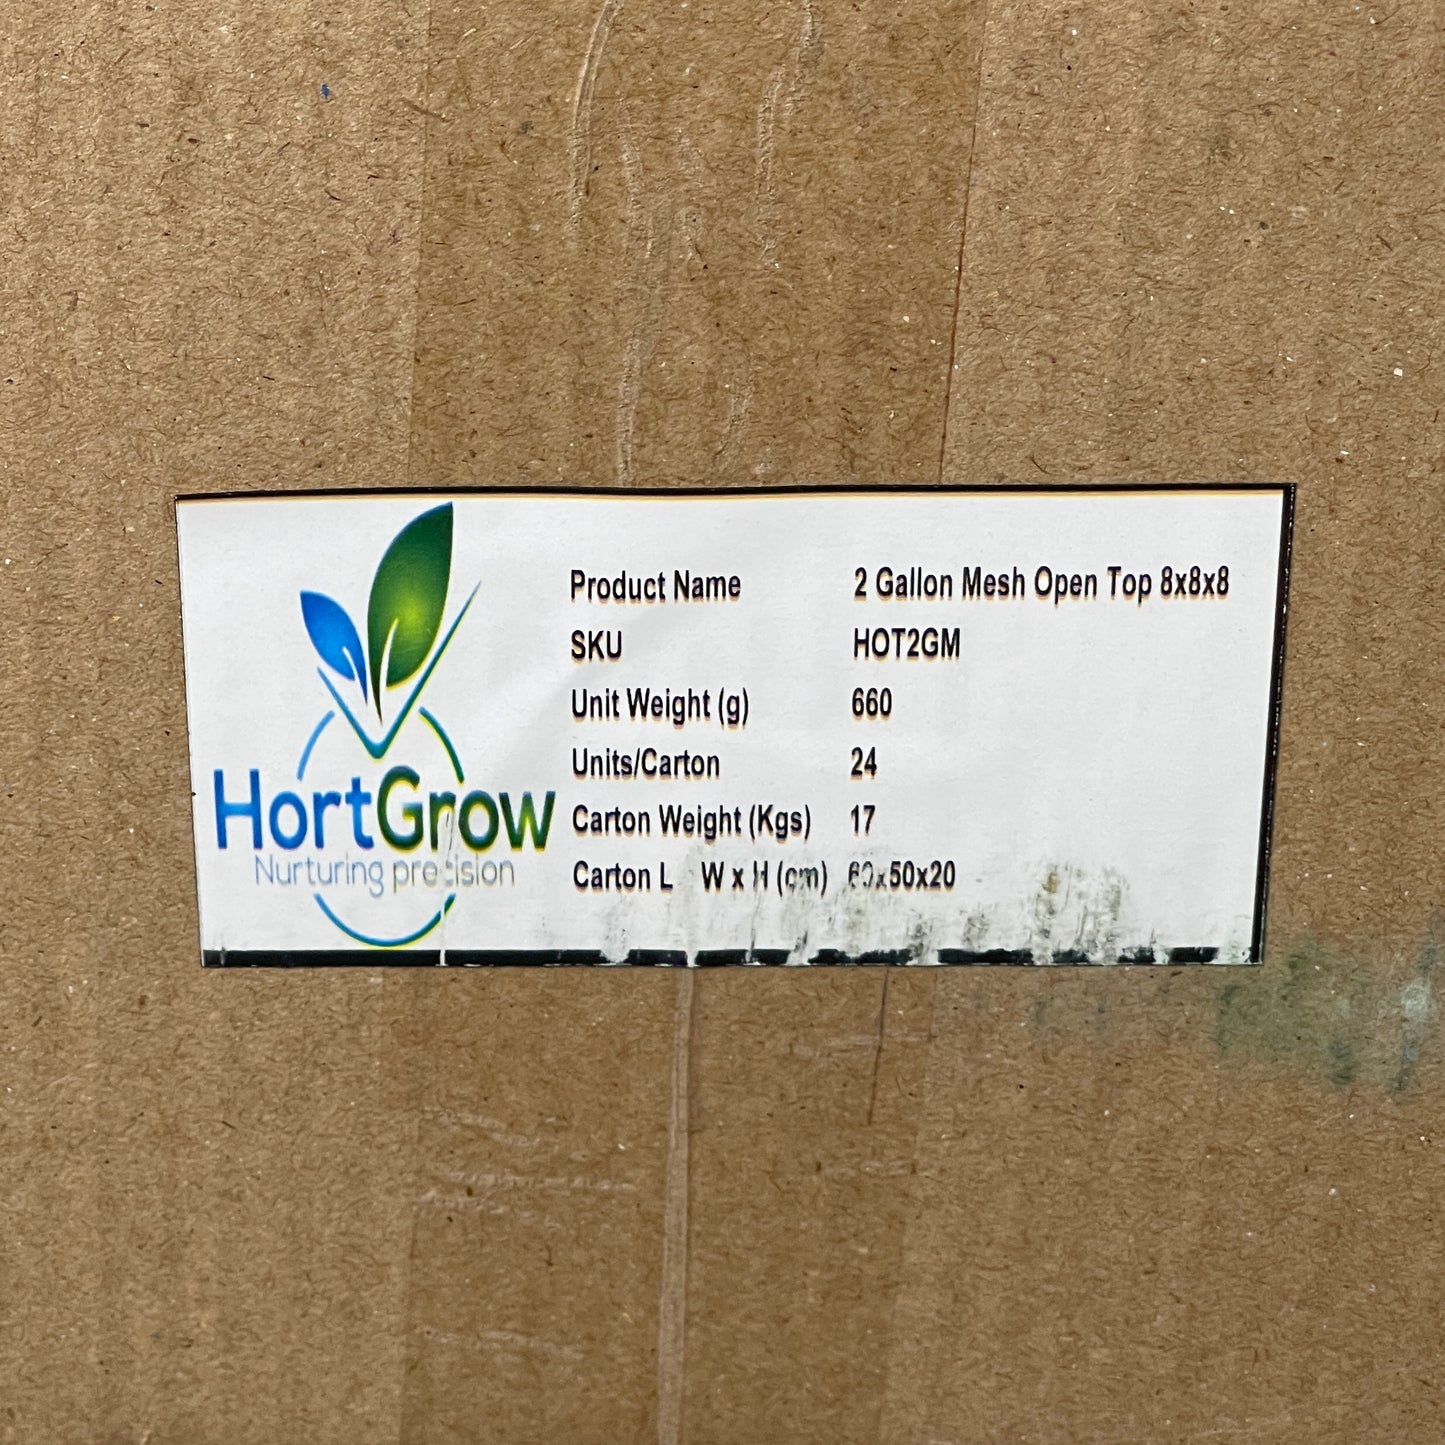 Case of 24 HORTGROW 2-Gallon Mesh Open Top Hydroponic Substrate HOT2GM (New)